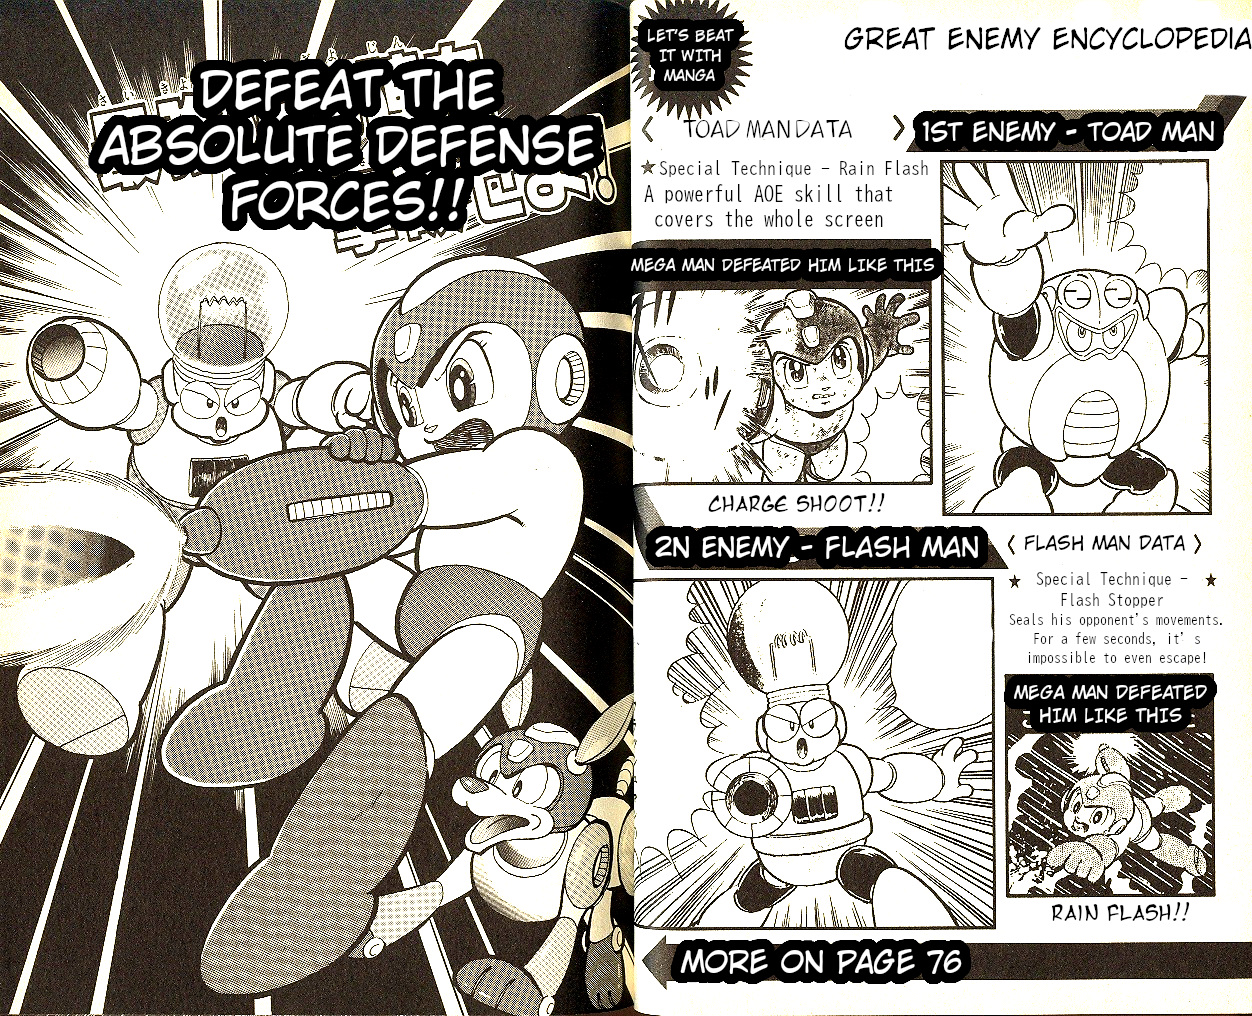 Rockman 4 Vol. 1 Ch. 2 Defeat the Absolute Defense Forces